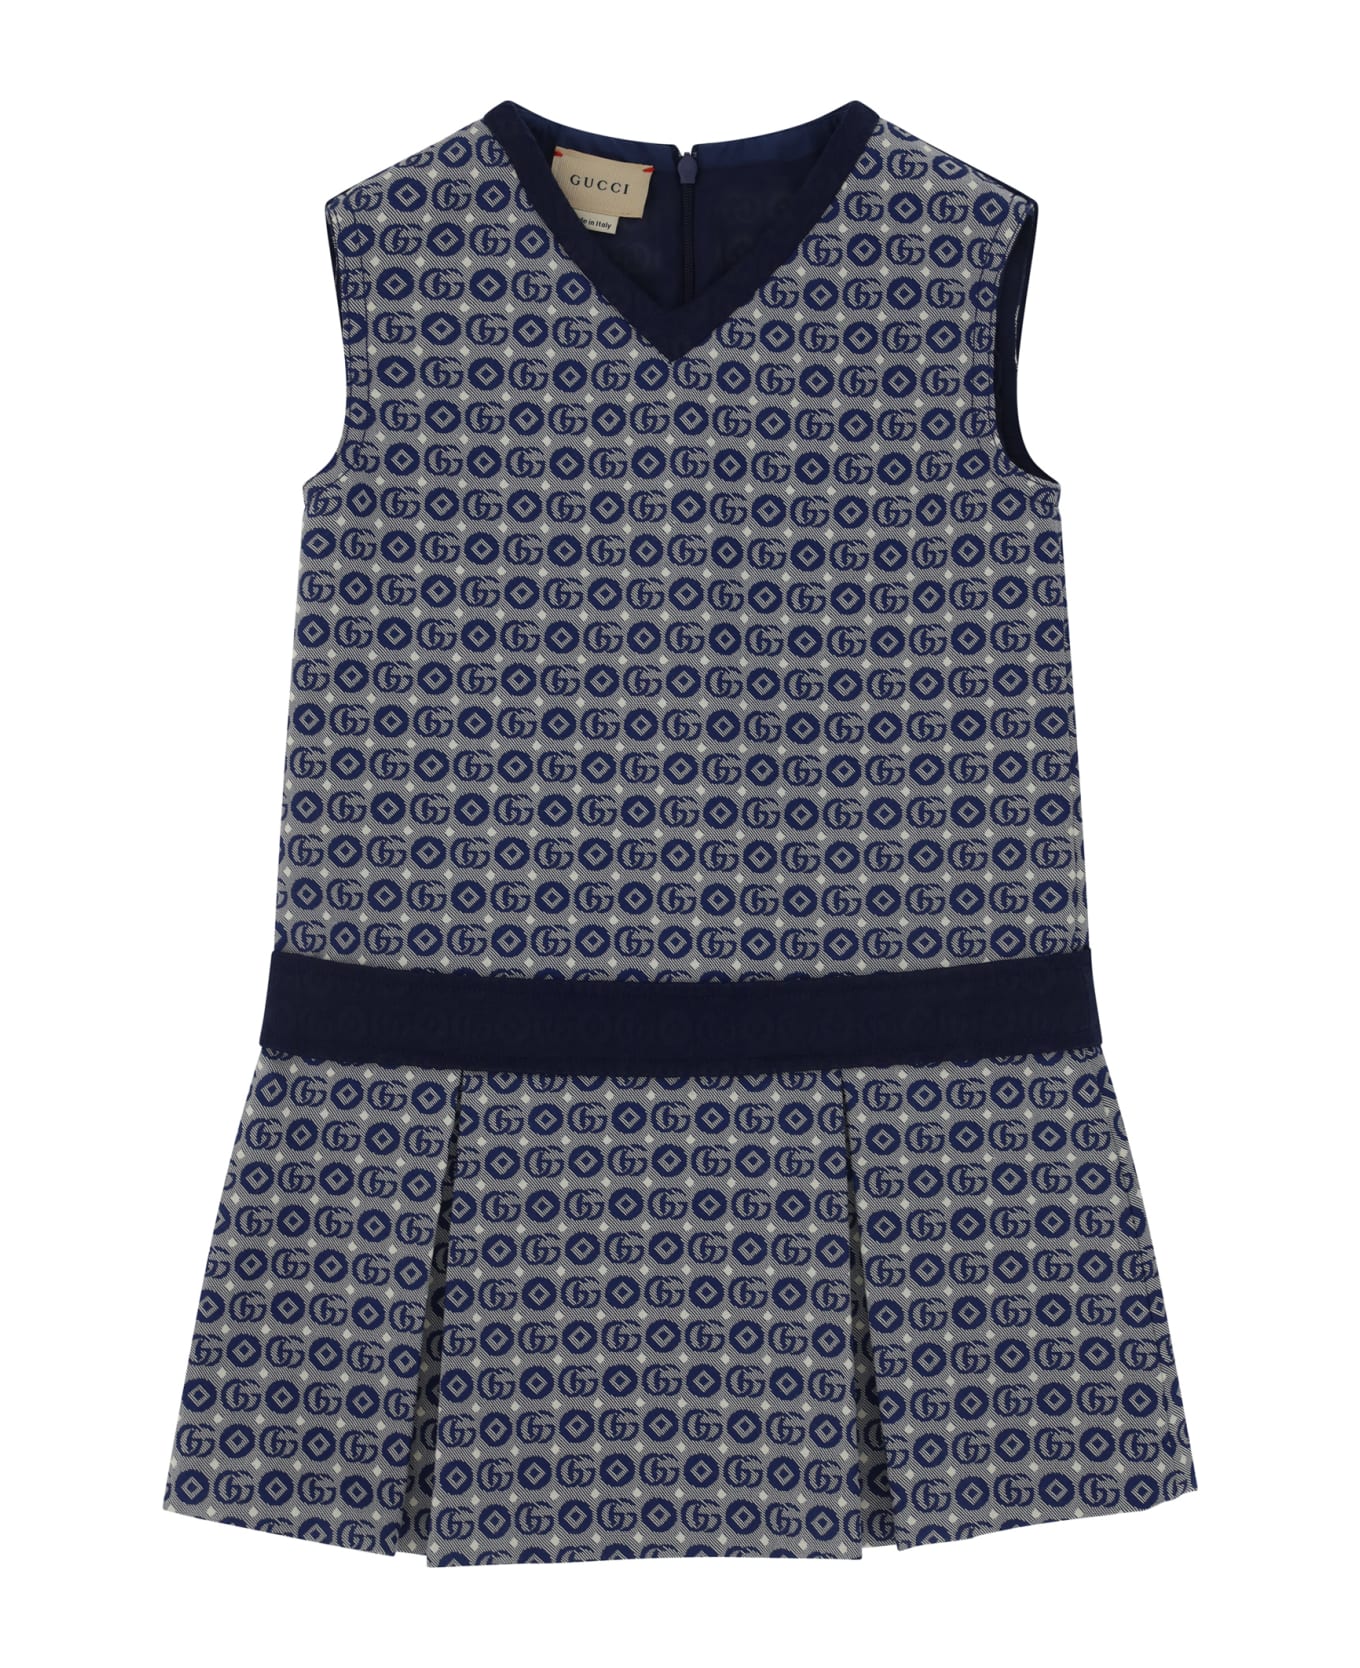 Gucci Dress For Girl - NAVY